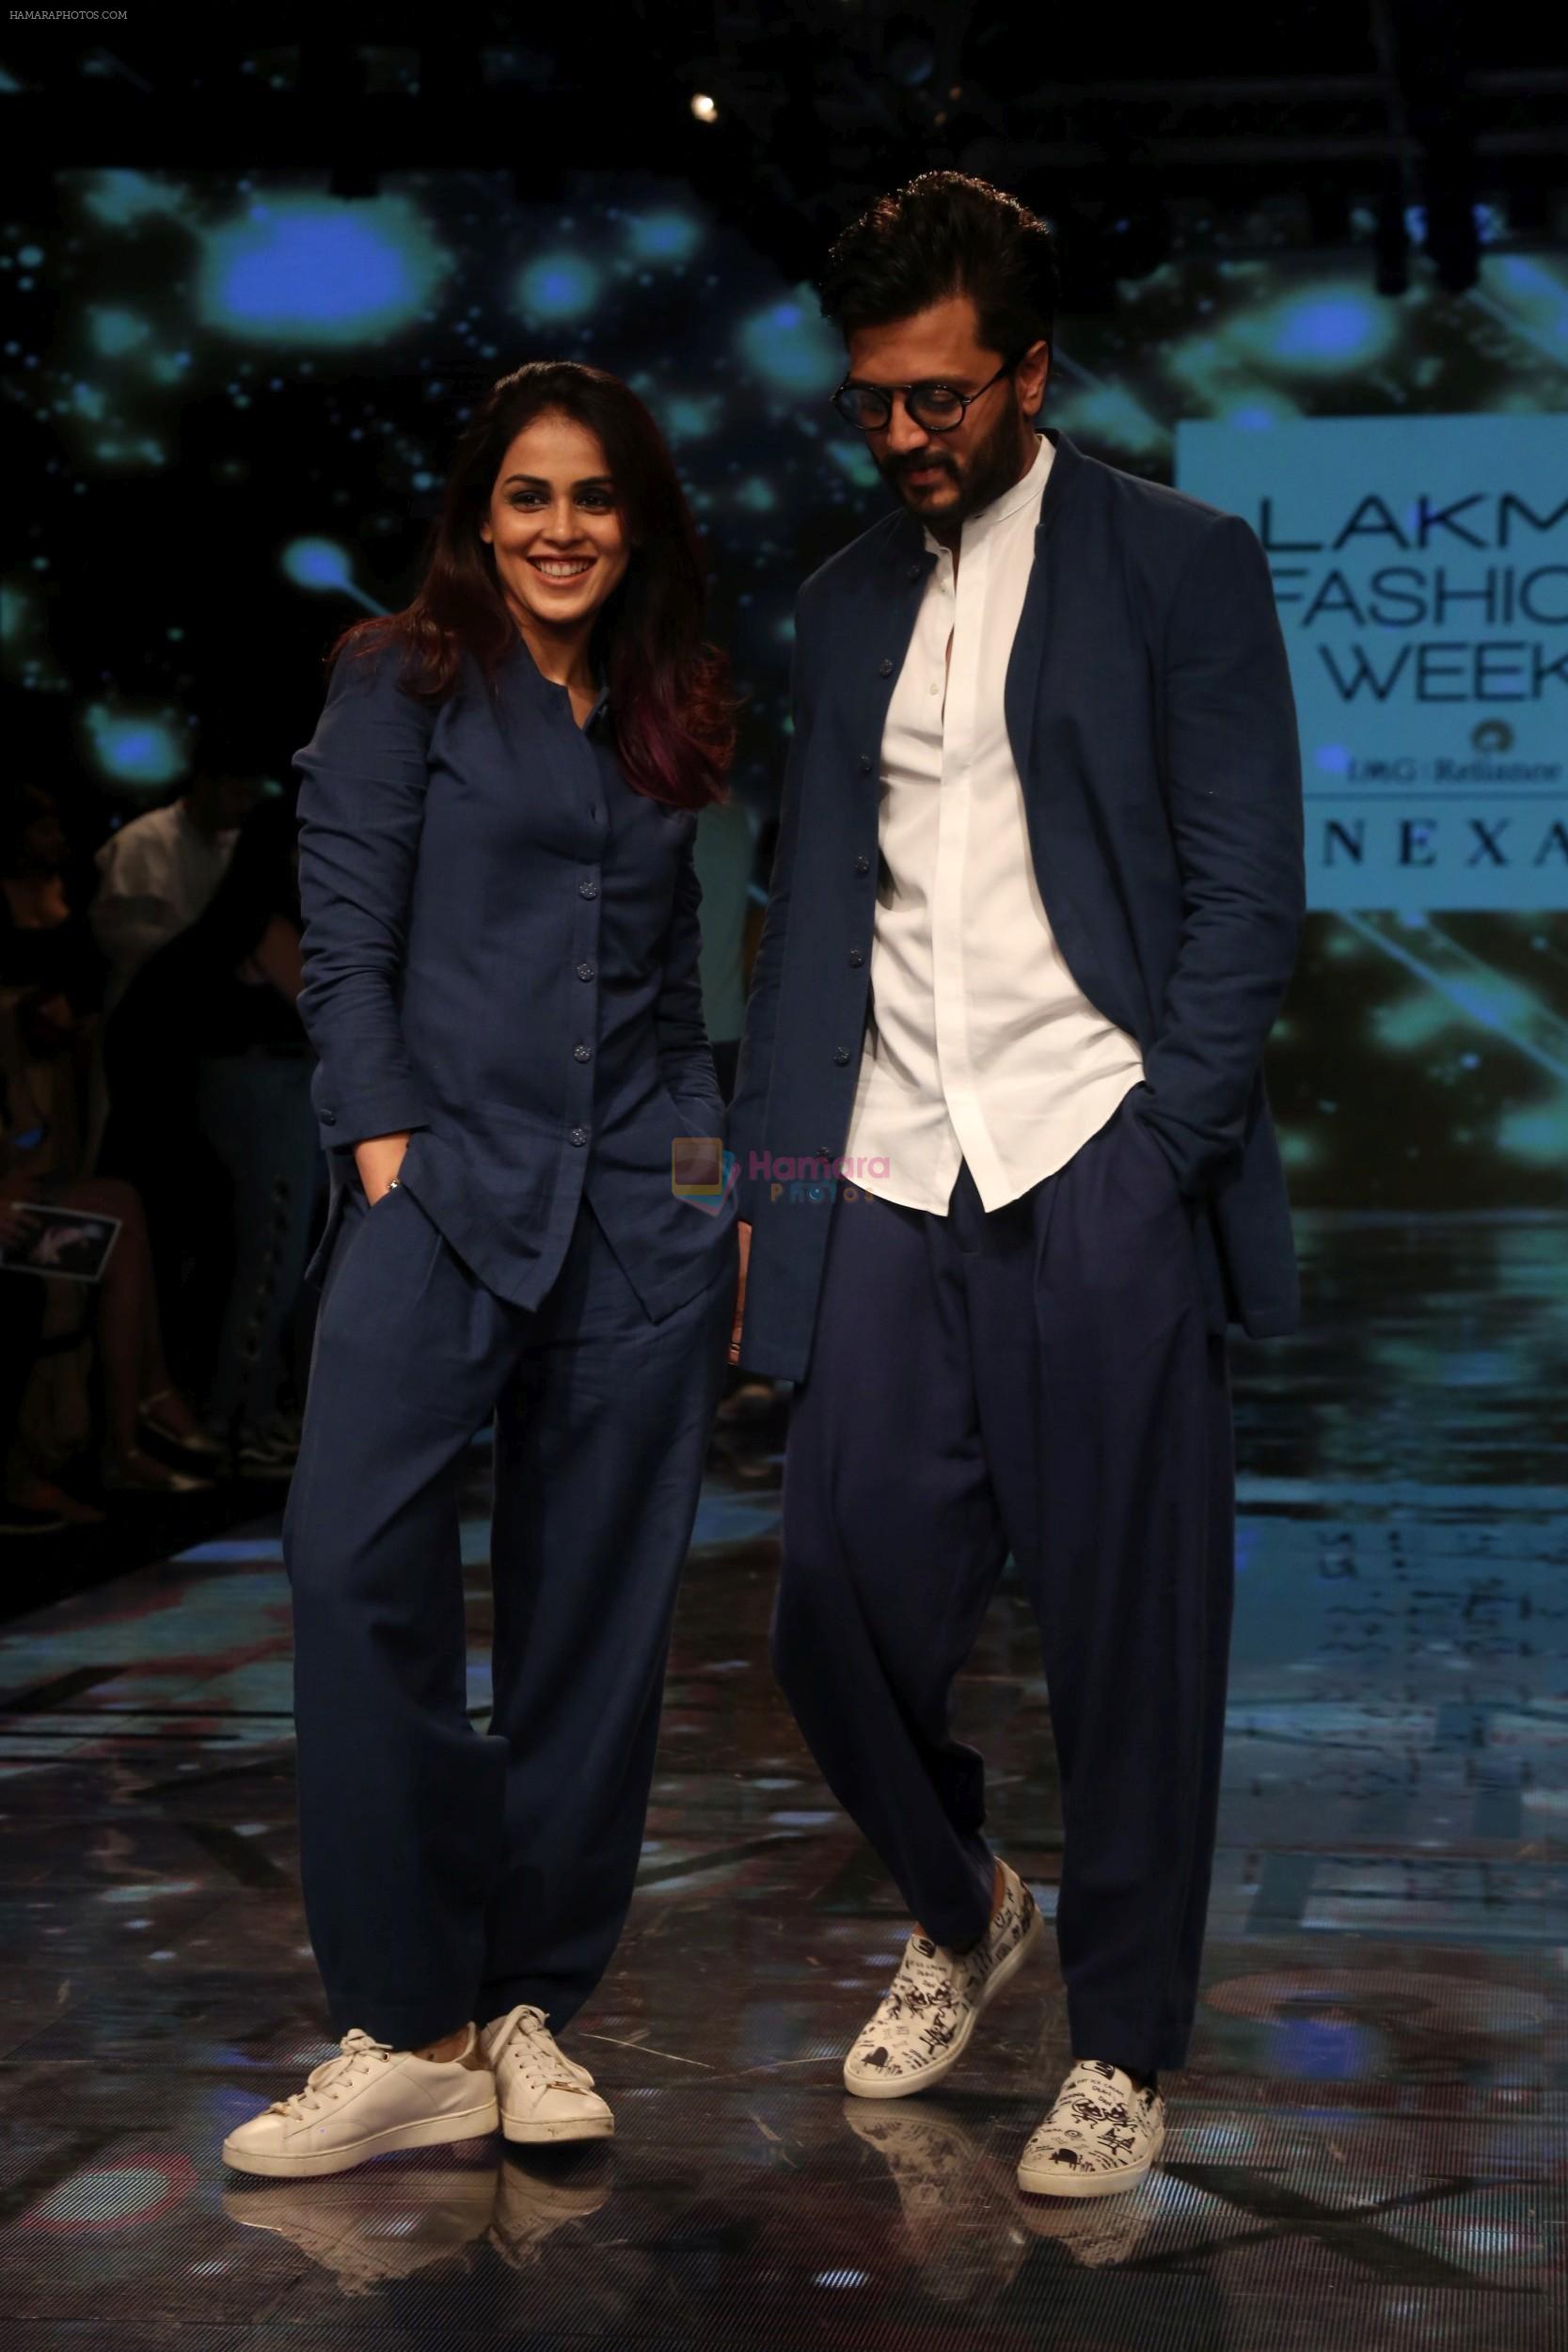 Riteish Deshmukh With His Wife at Lakme Fashion Week 2019 on 22nd Aug 2019